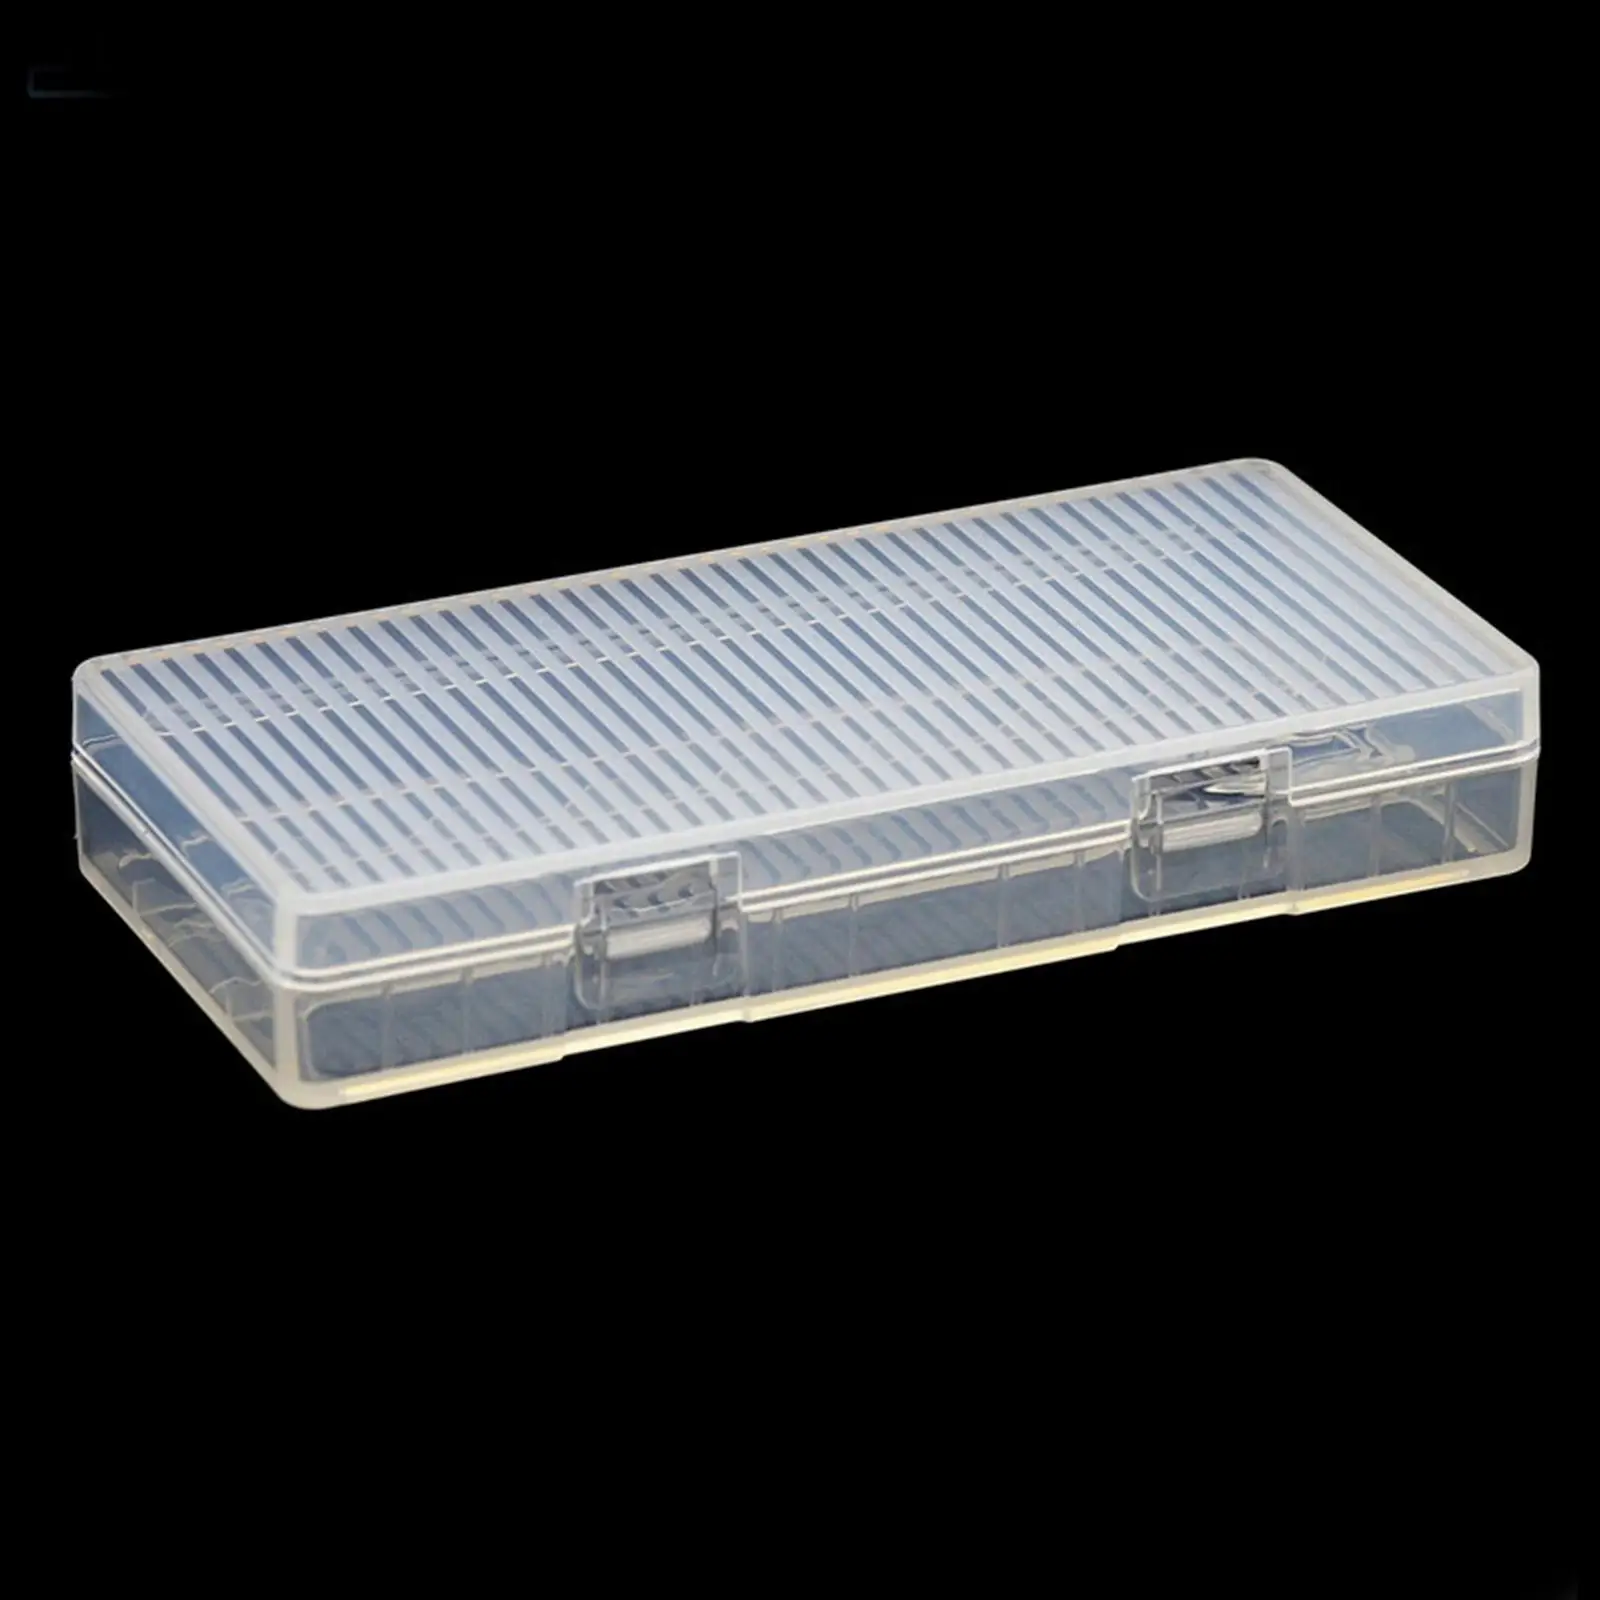 Battery Storage Case Holds 8 AA Batteries Clear Color Practical Dustproof Portable Durable Anti Collision Organizer Holder Box